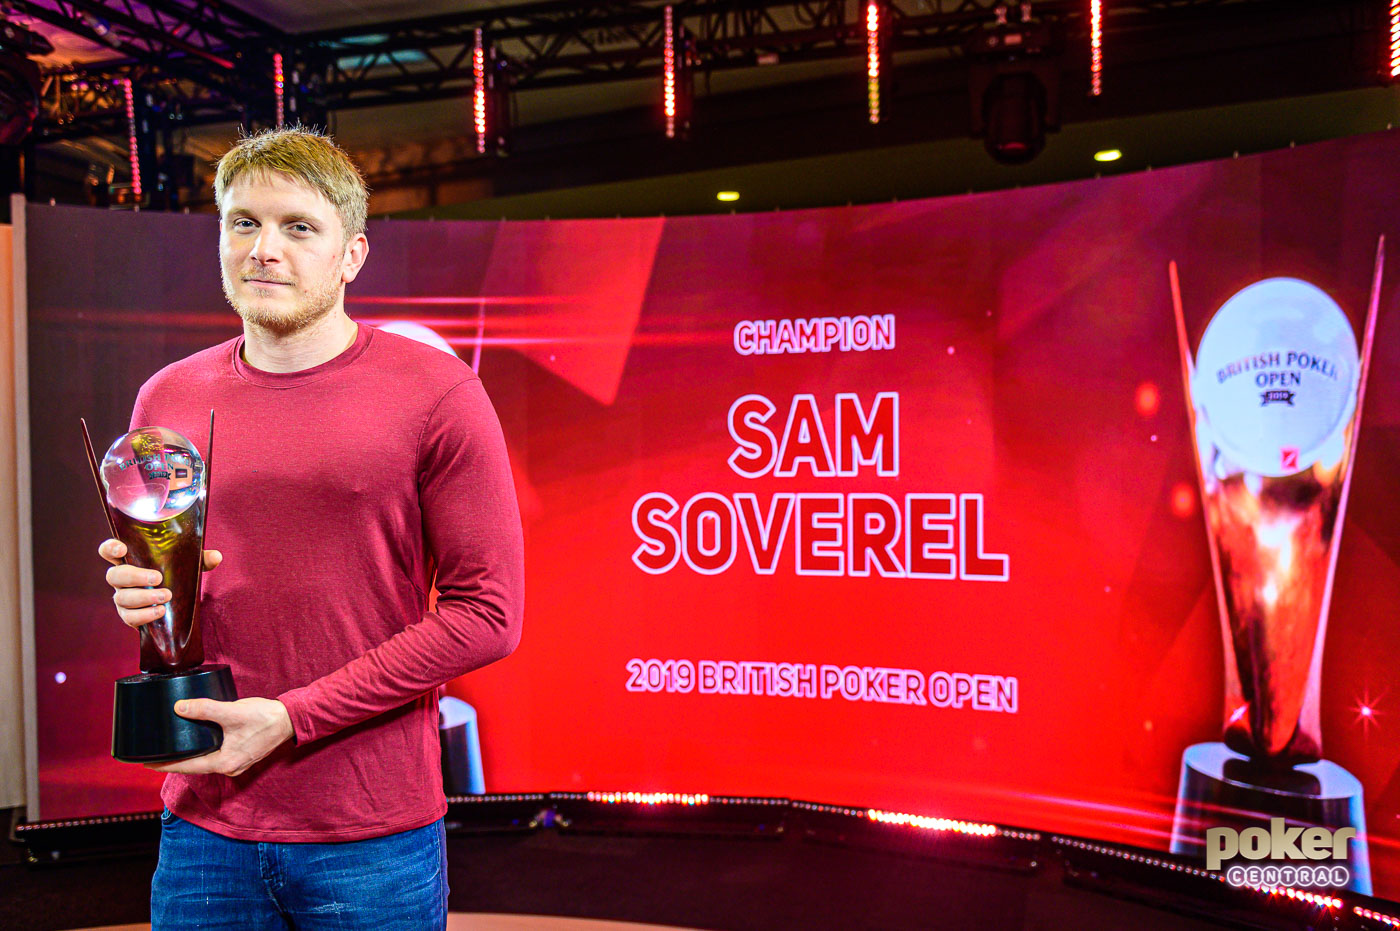 Sam Soverel became the first ever British Poker Open champion at Aspers Casino in London.